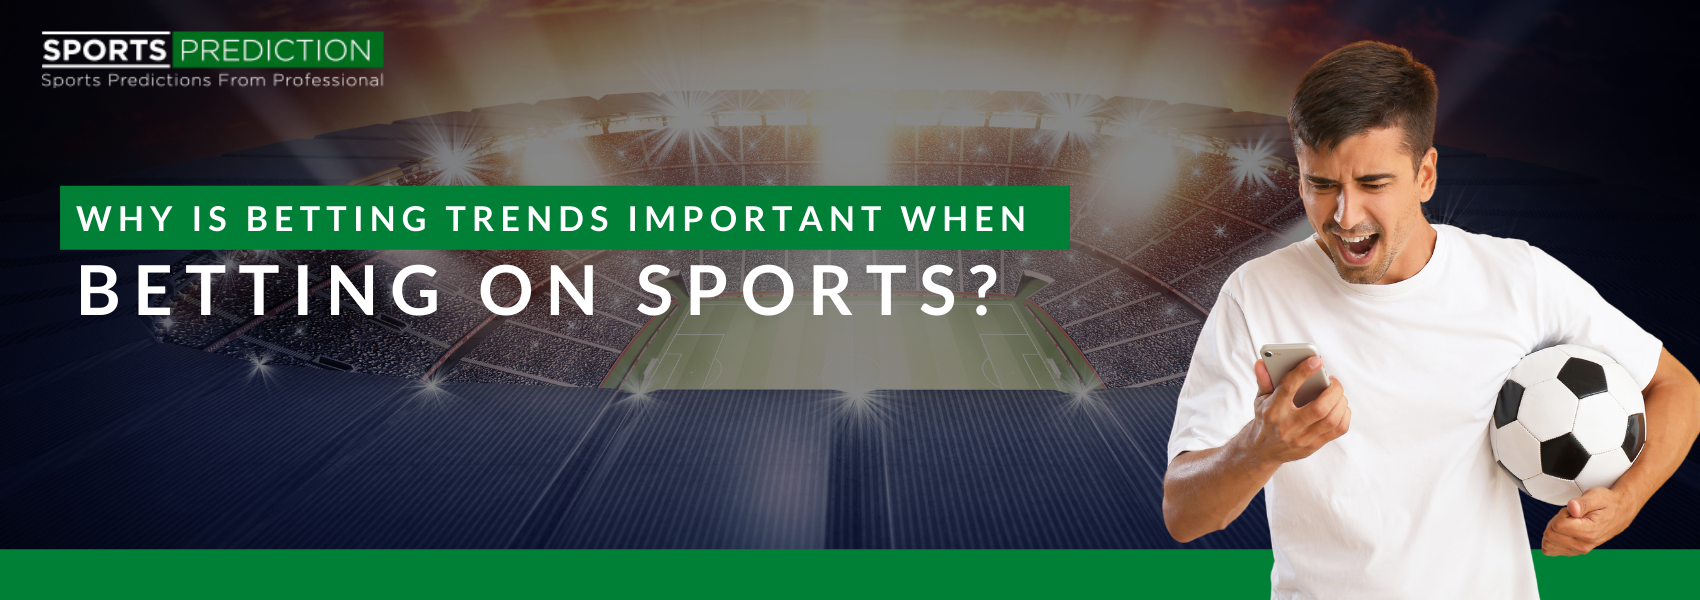 Why Is Betting Trends Important When Betting On Sports?